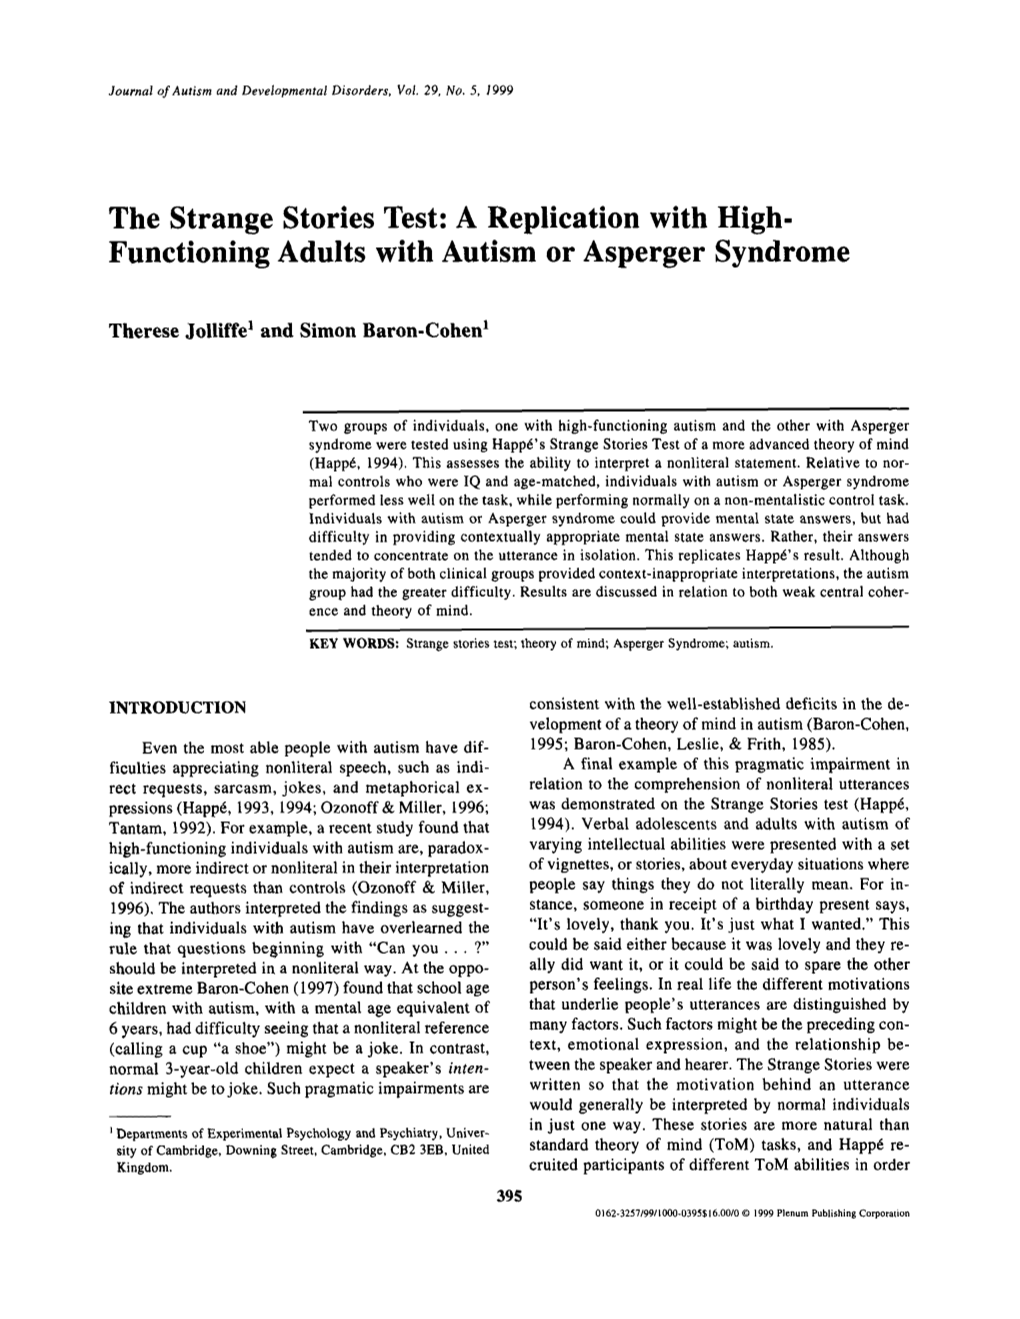 The Strange Stories Test: a Replication with High- Functioning Adults with Autism Or Asperger Syndrome